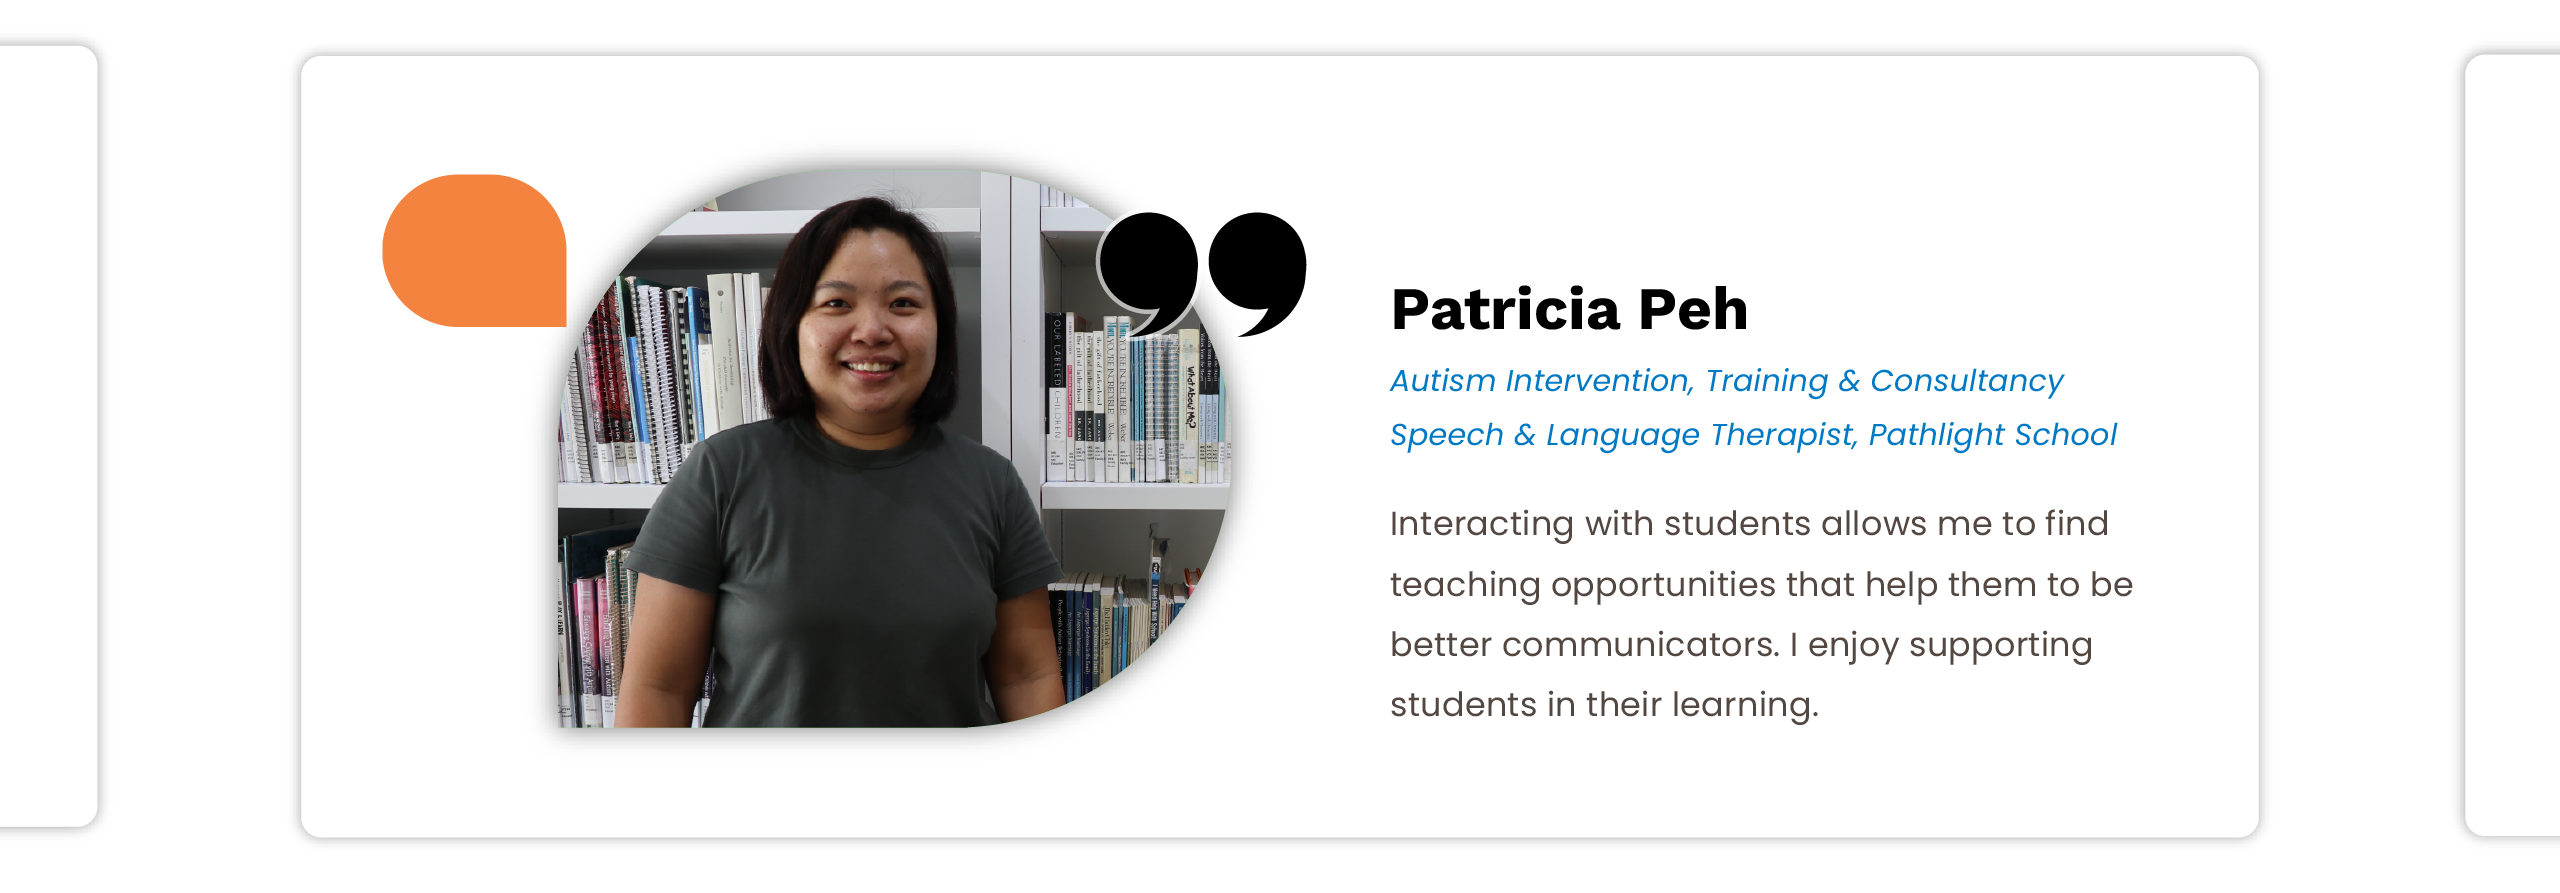 Patricia Peh: Interacting with students allow me to find
teaching opportunities that help them to be better communicators. I enjoyed supporting students in their learning.